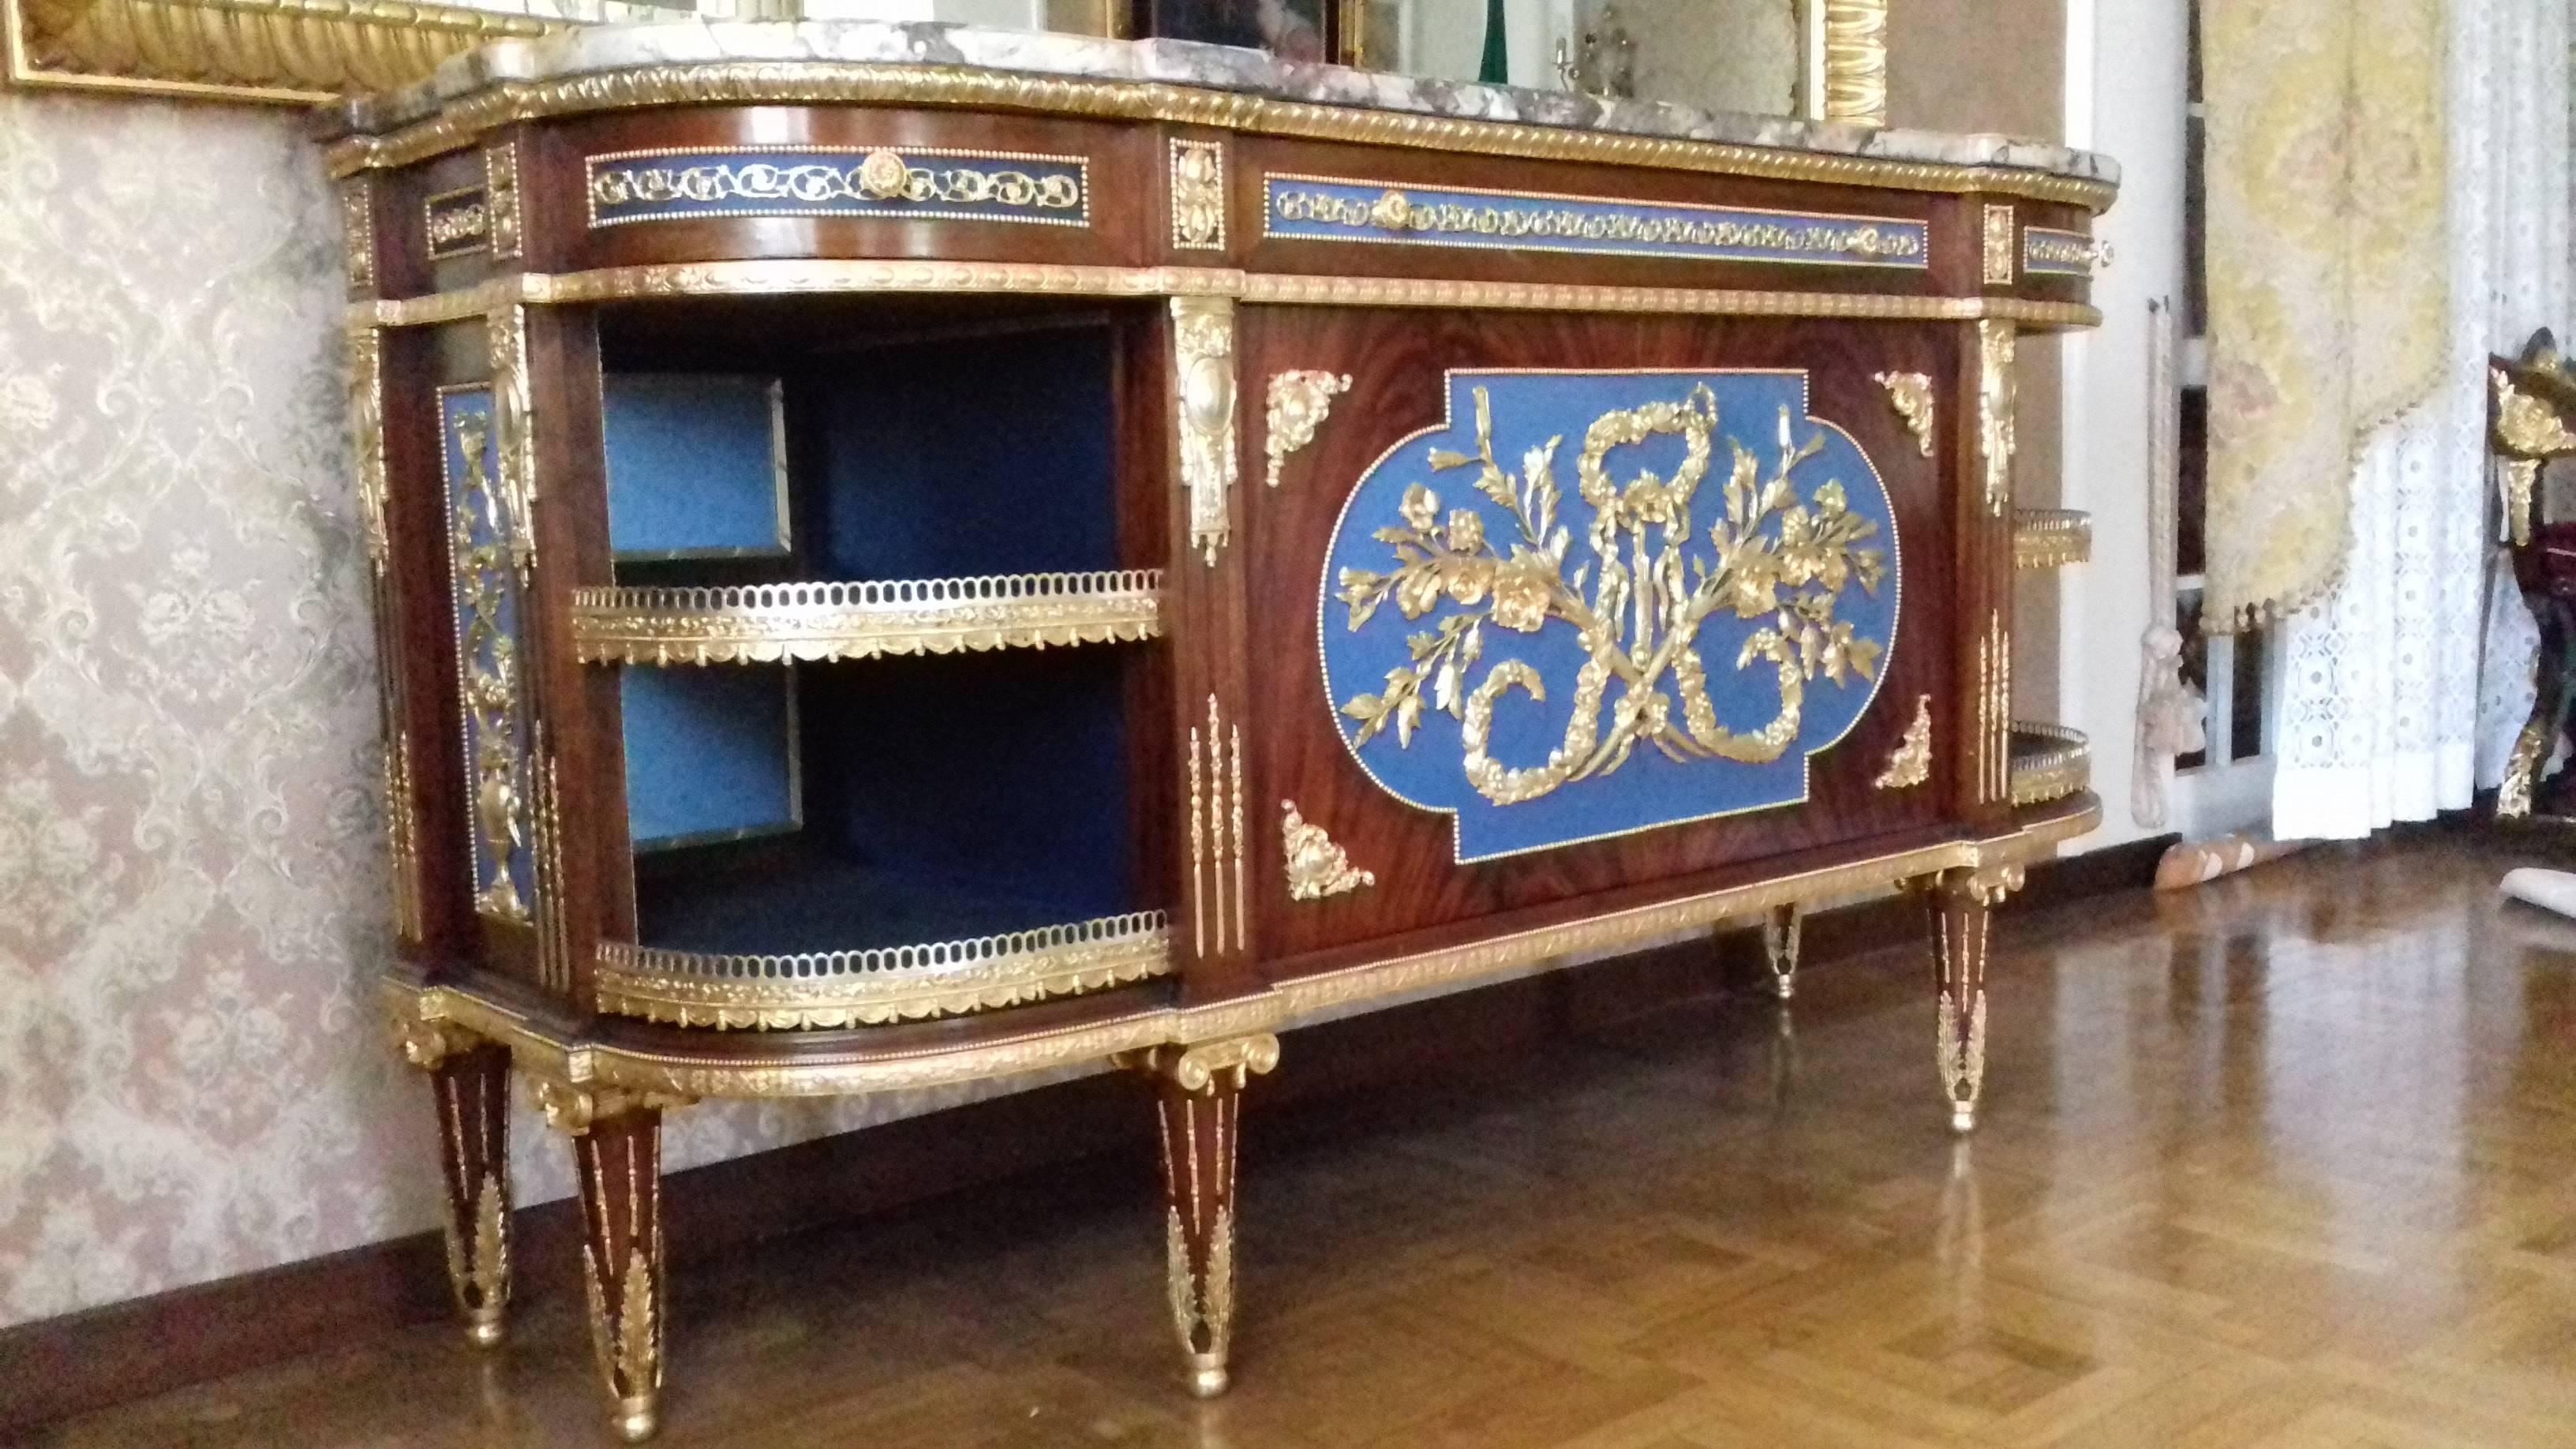 Crescentic sideboard in solid mahogany year 1962 just restored size cm 189 x cm 62 x H 103
Peach Blossom marble from 3.00 cm
Hand-polished (no polyester) and N. 6 feet.
Bronzes all gilded gold leaf, central frieze with flowers, Greek on the